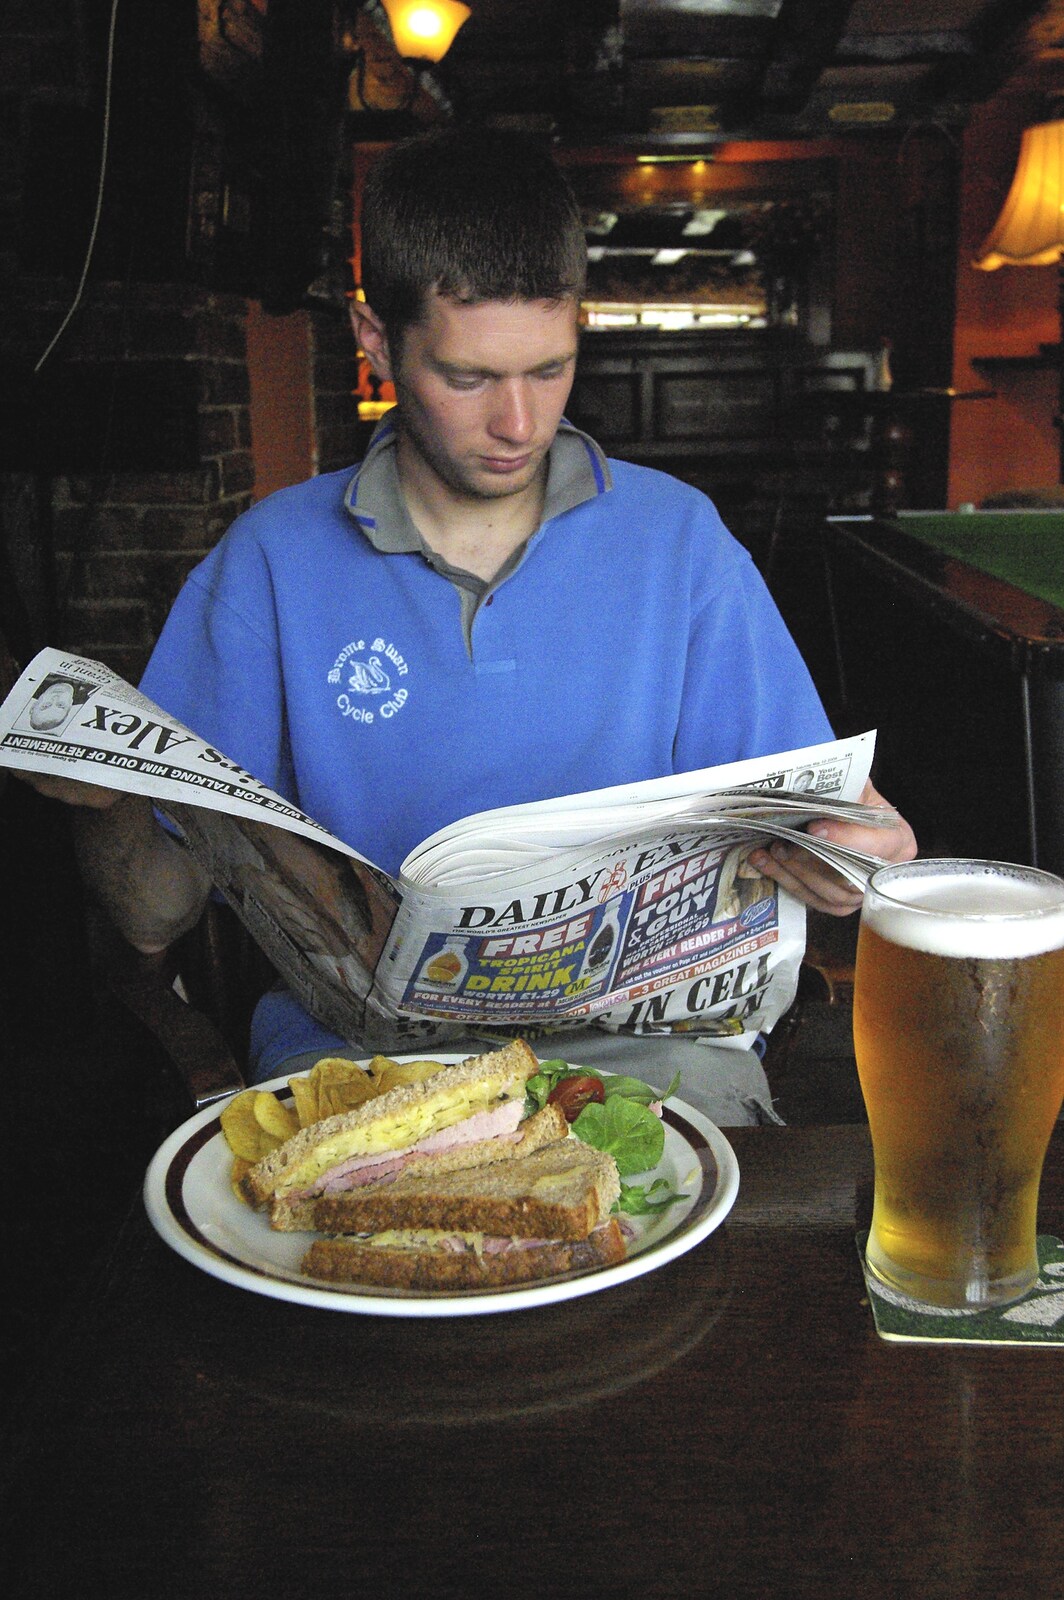 The BSCC Weekend Away, Thaxted, Essex - 10th May 2008: The Boy Phil reads the paper